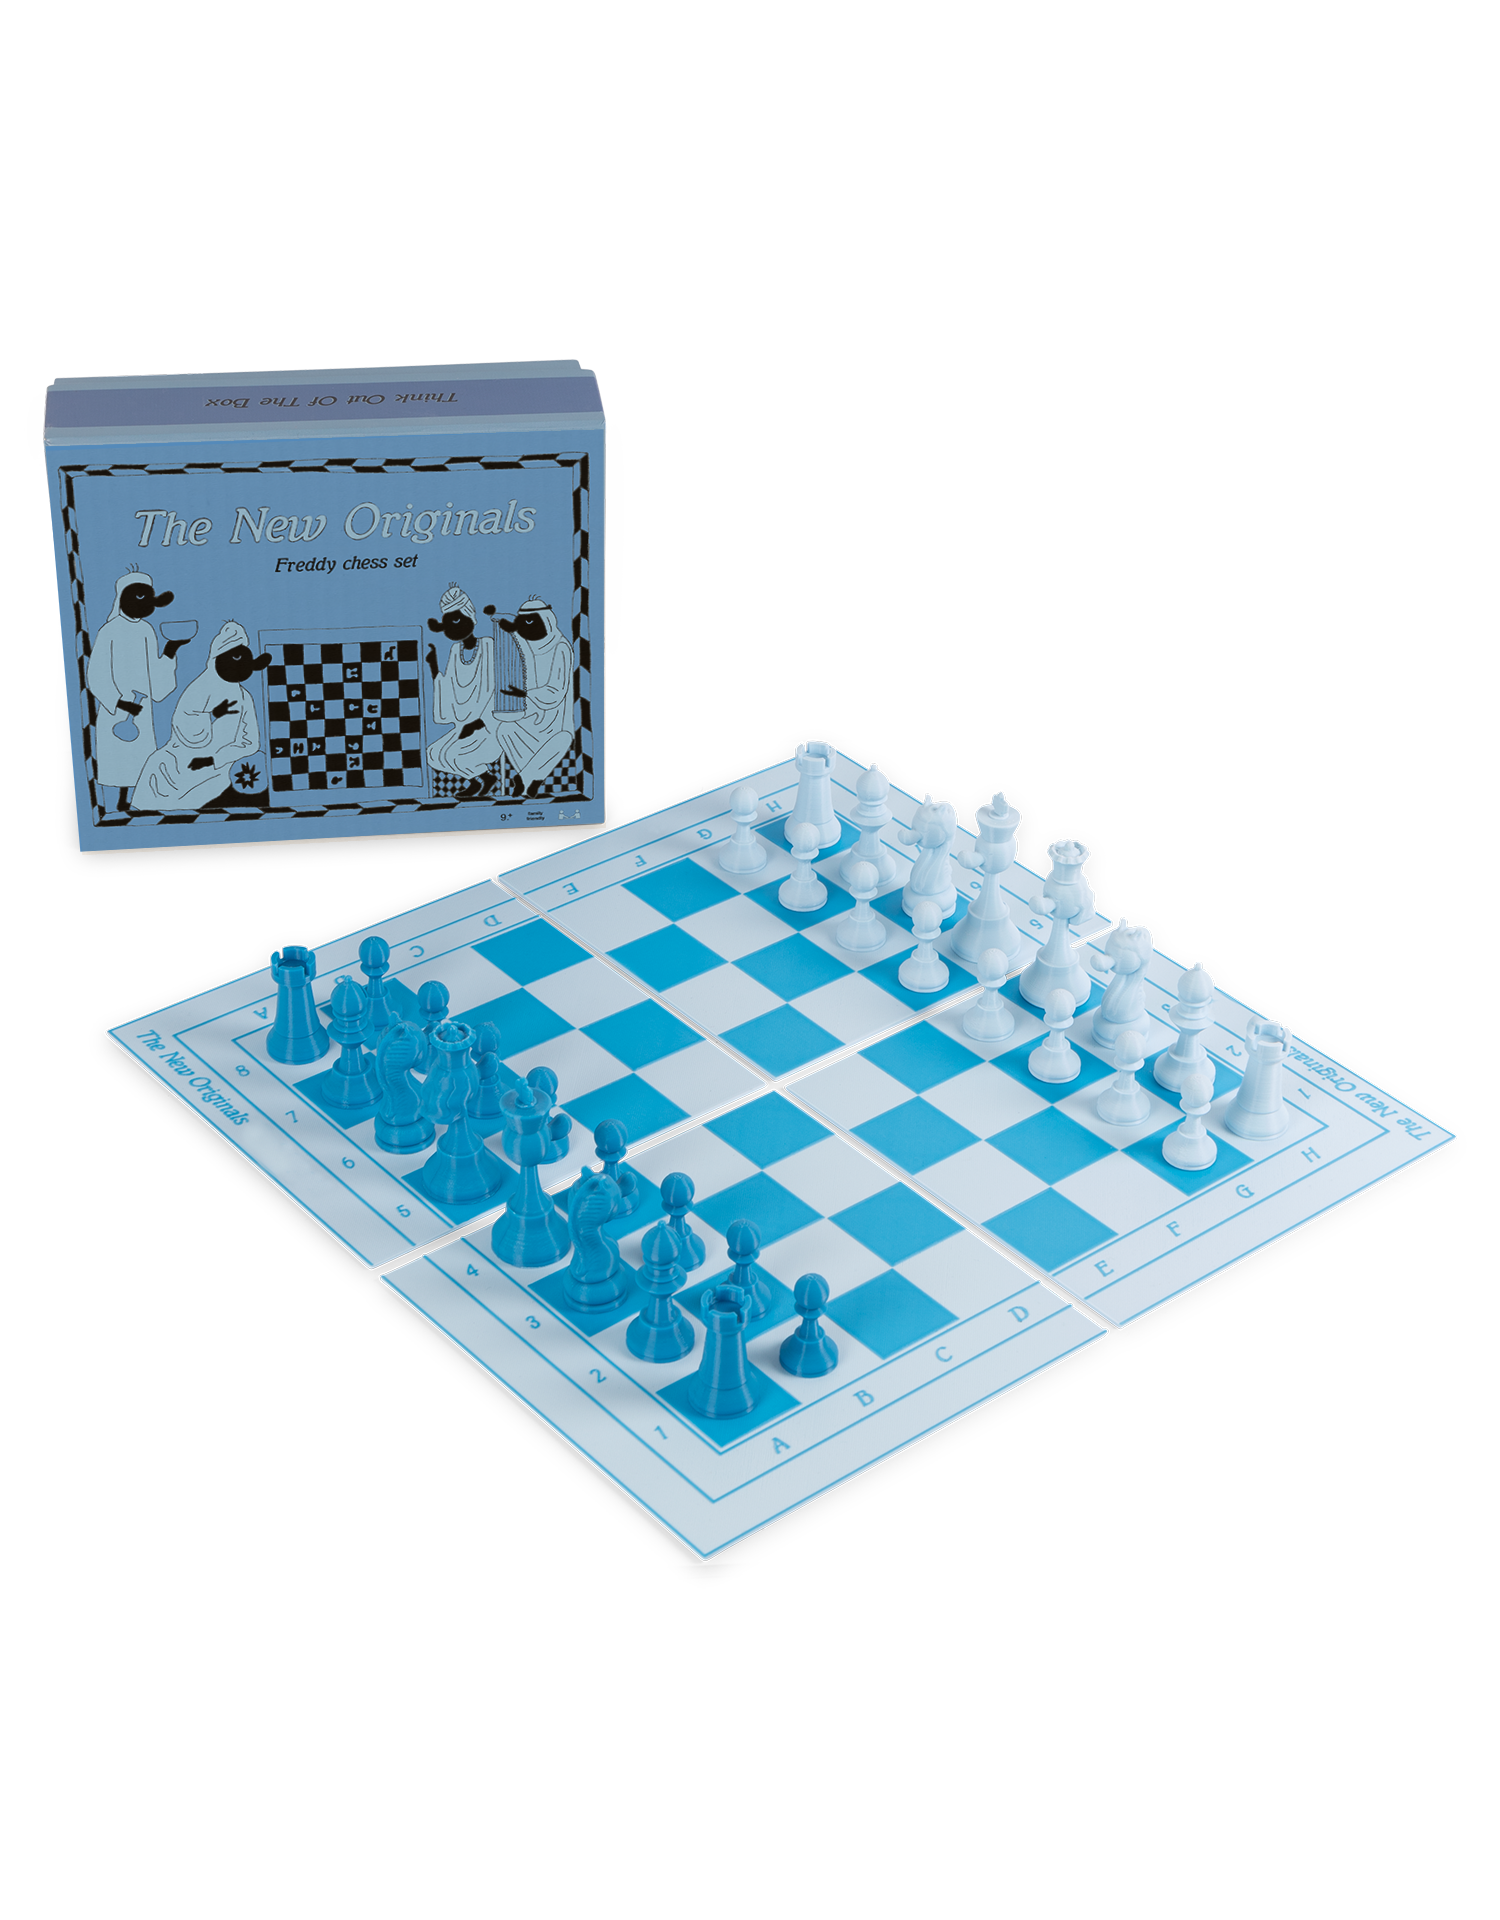 3D Printed Chess Set_The New Originals_Space Junk co_Alan Nguyen_productshot3.png